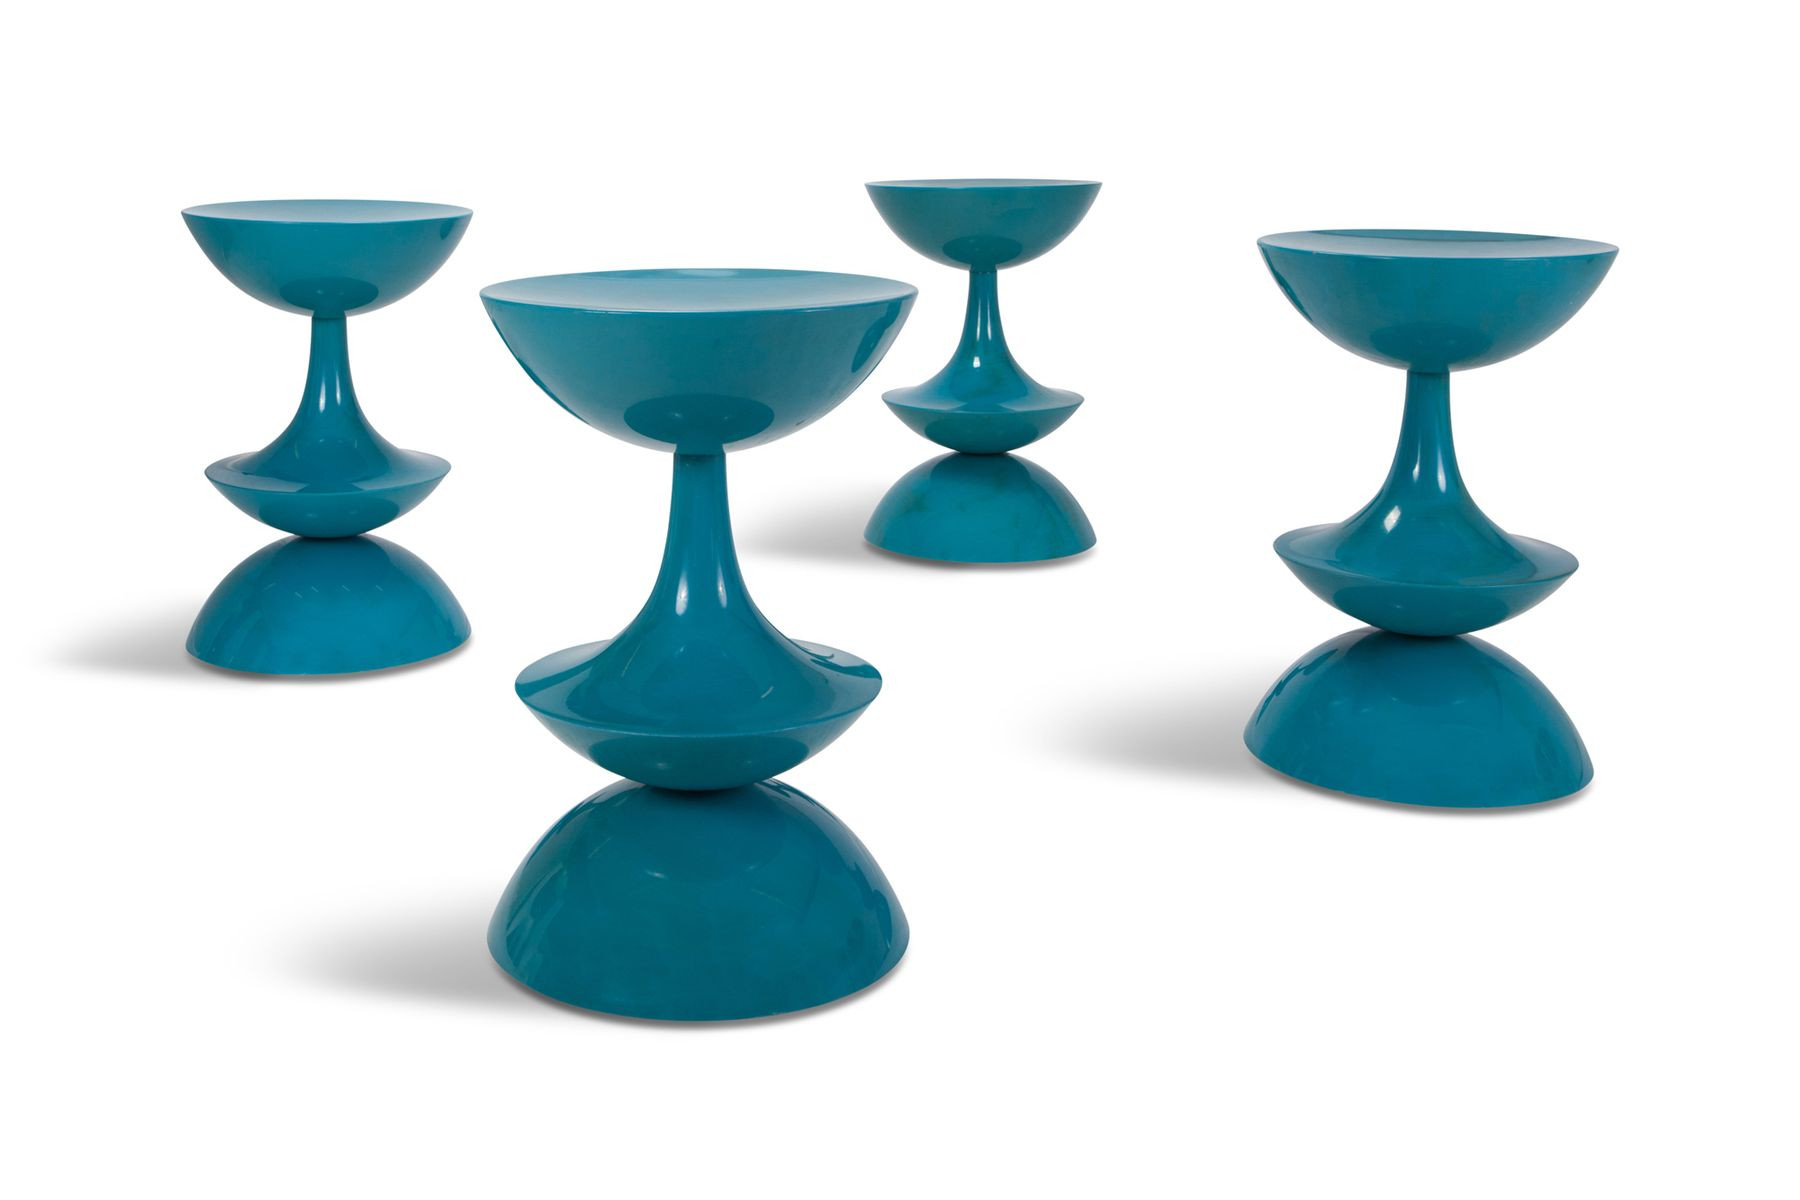 26 Cute Royal Copenhagen Vases for Sale 2024 free download royal copenhagen vases for sale of vintage petrol blue od 5321 stools by nanna ditzel set of 4 for intended for a10642 00 price per set